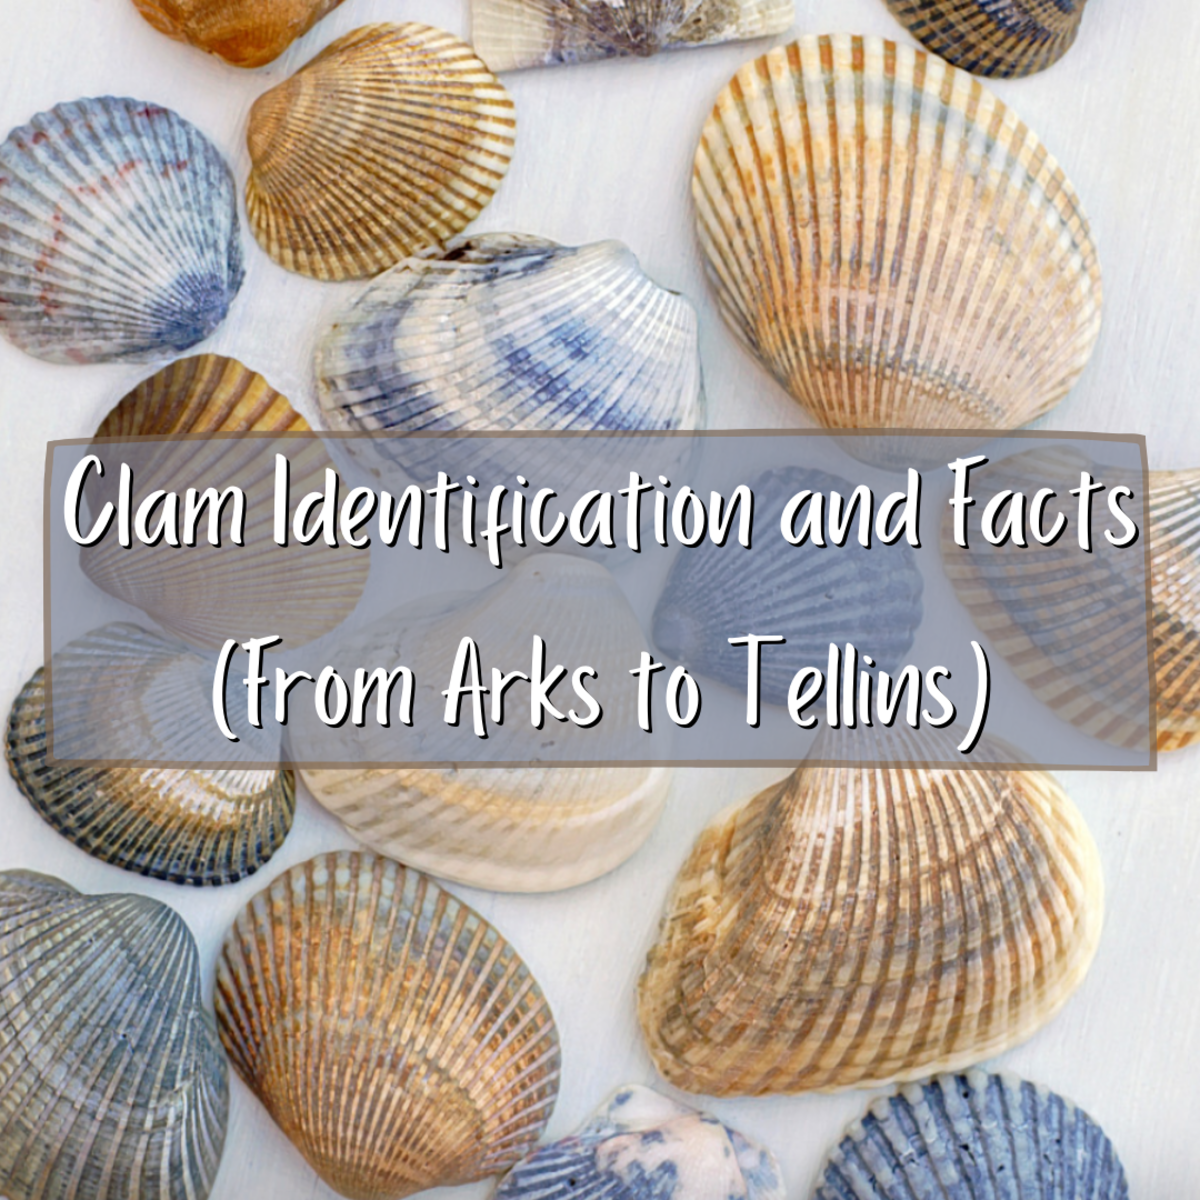 Read on to learn about 19 varieties of clams, including photos, identifying information, and interesting facts.